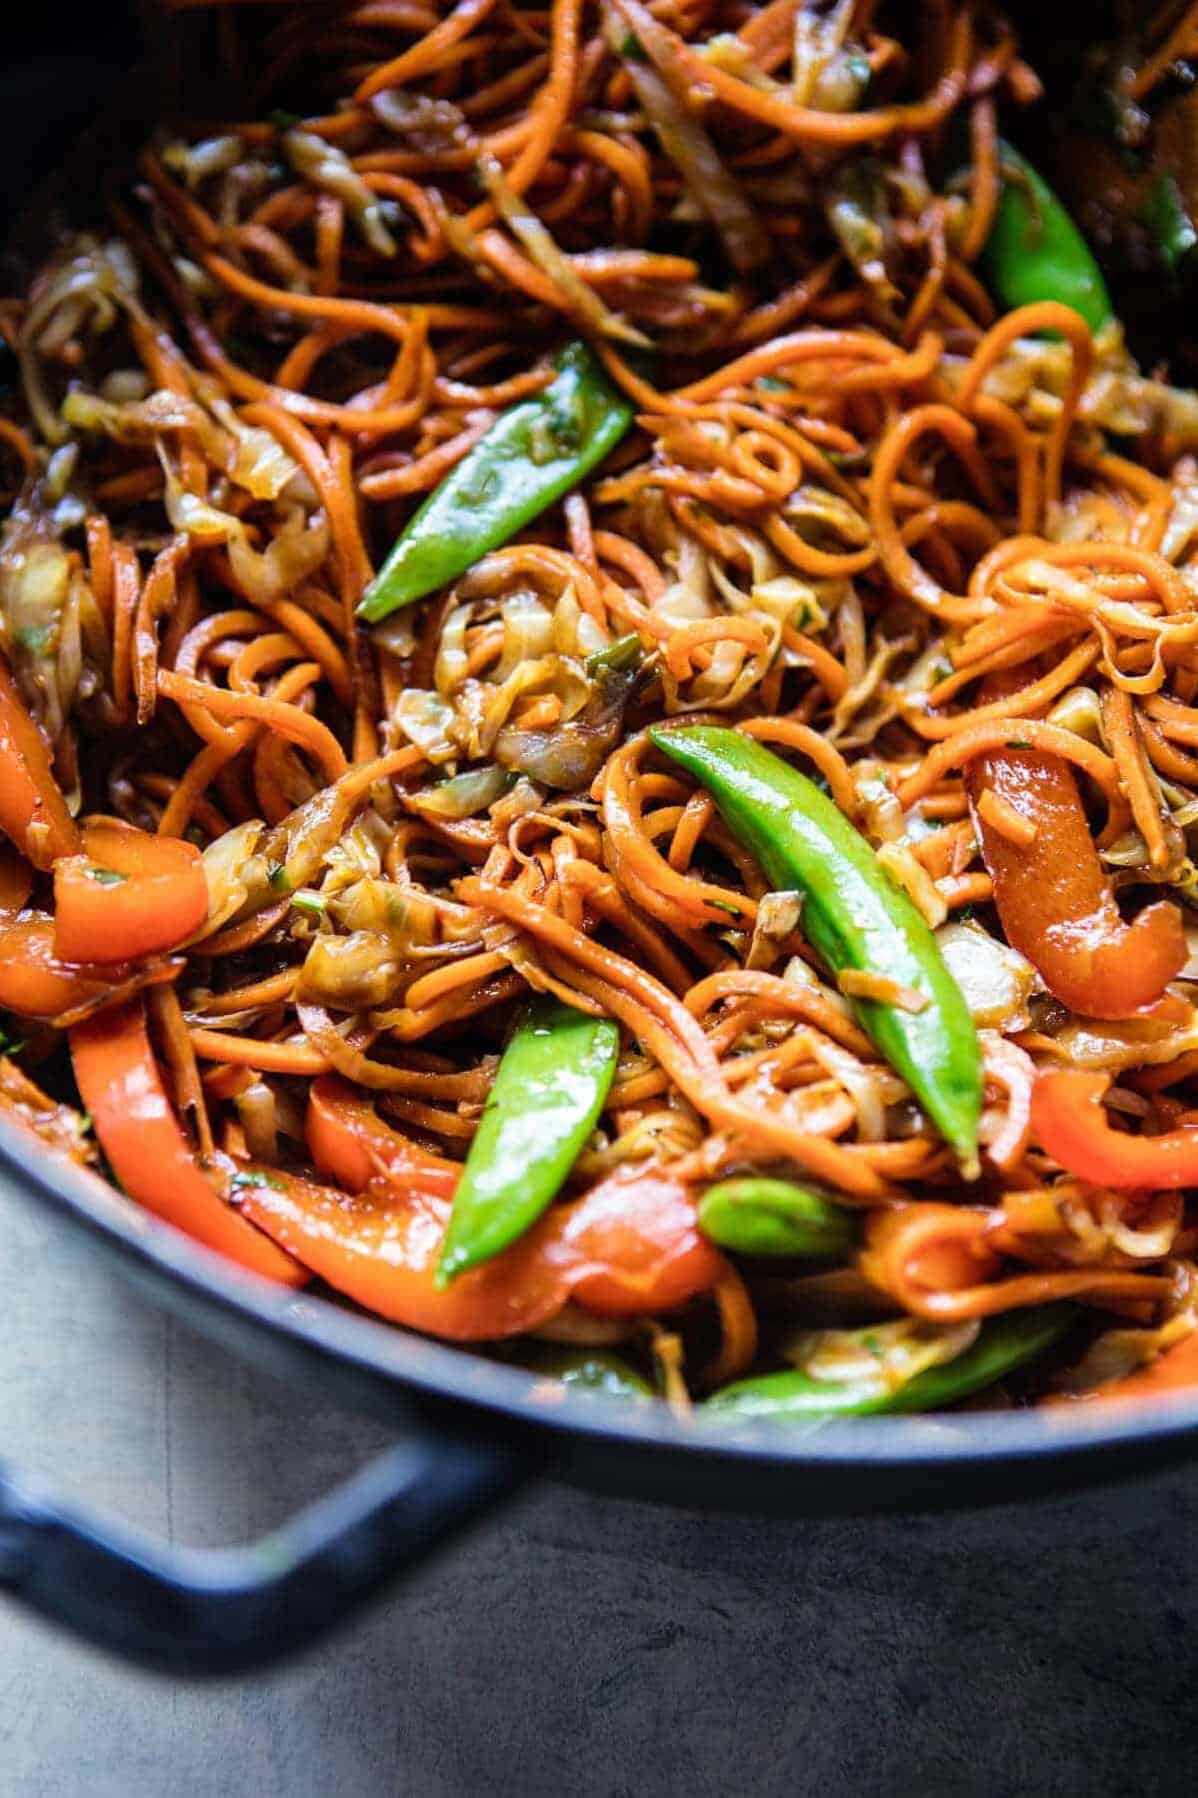  Vibrant and healthy, sweet potato noodles are a great alternative to regular noodles